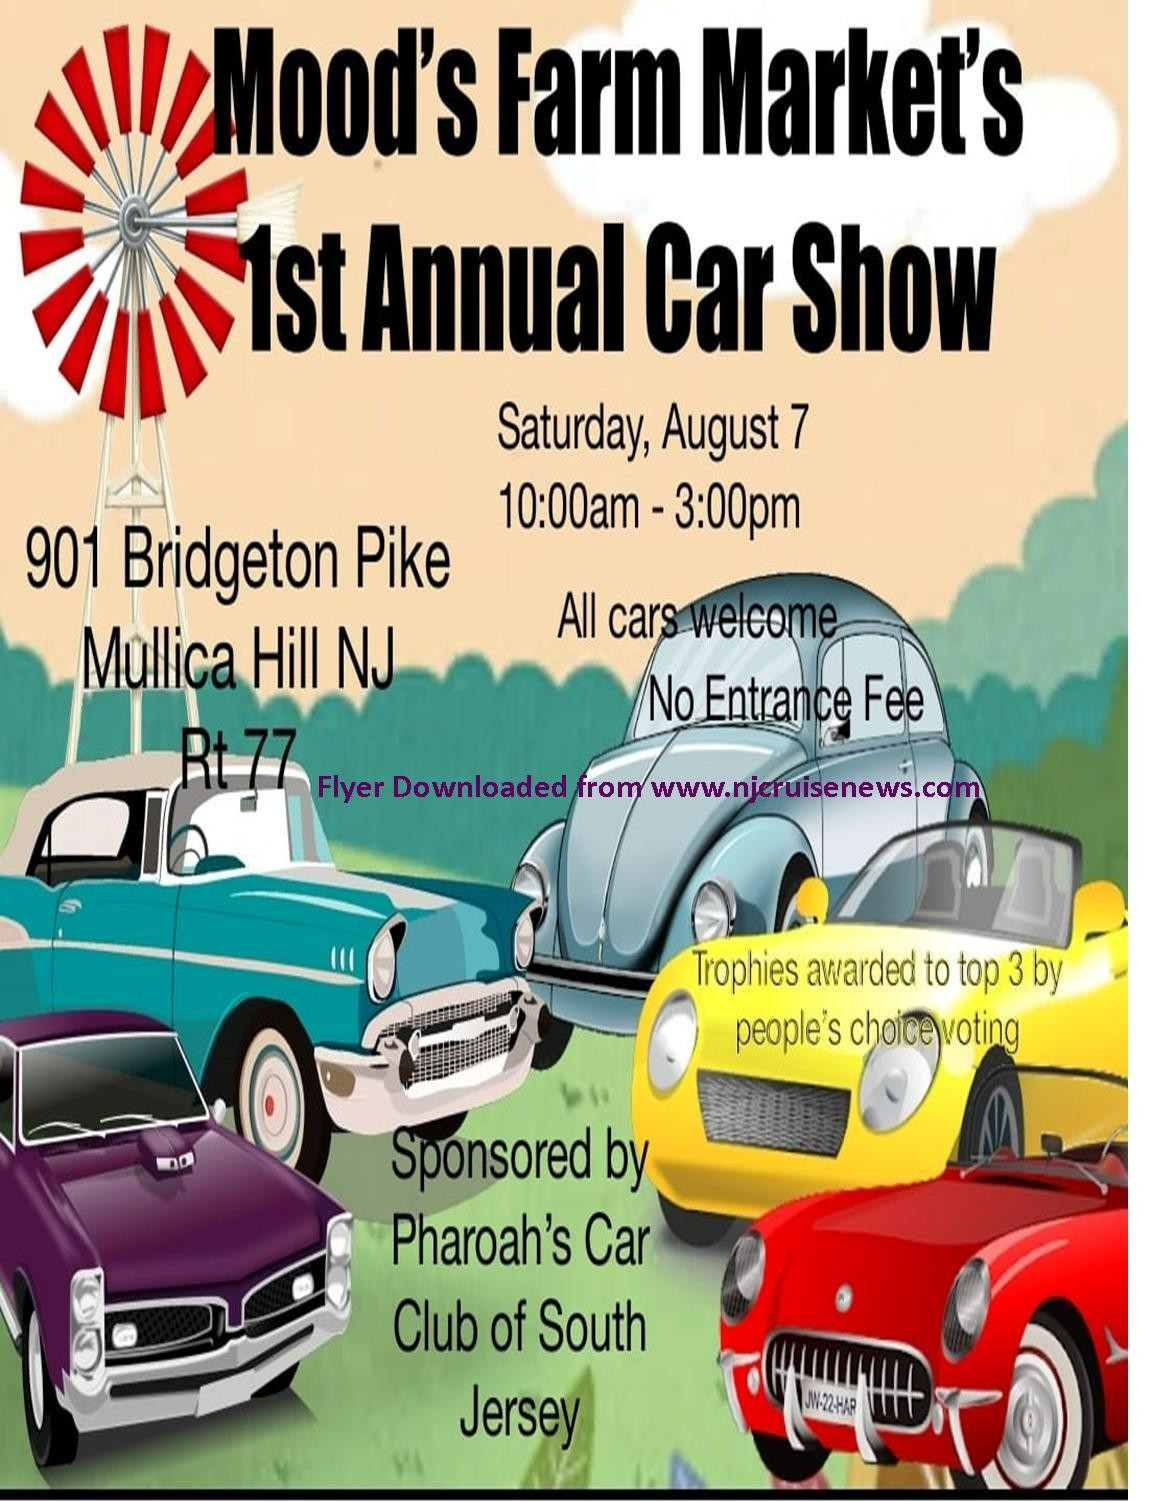 739 Popular Antique car shows south jersey for Speed